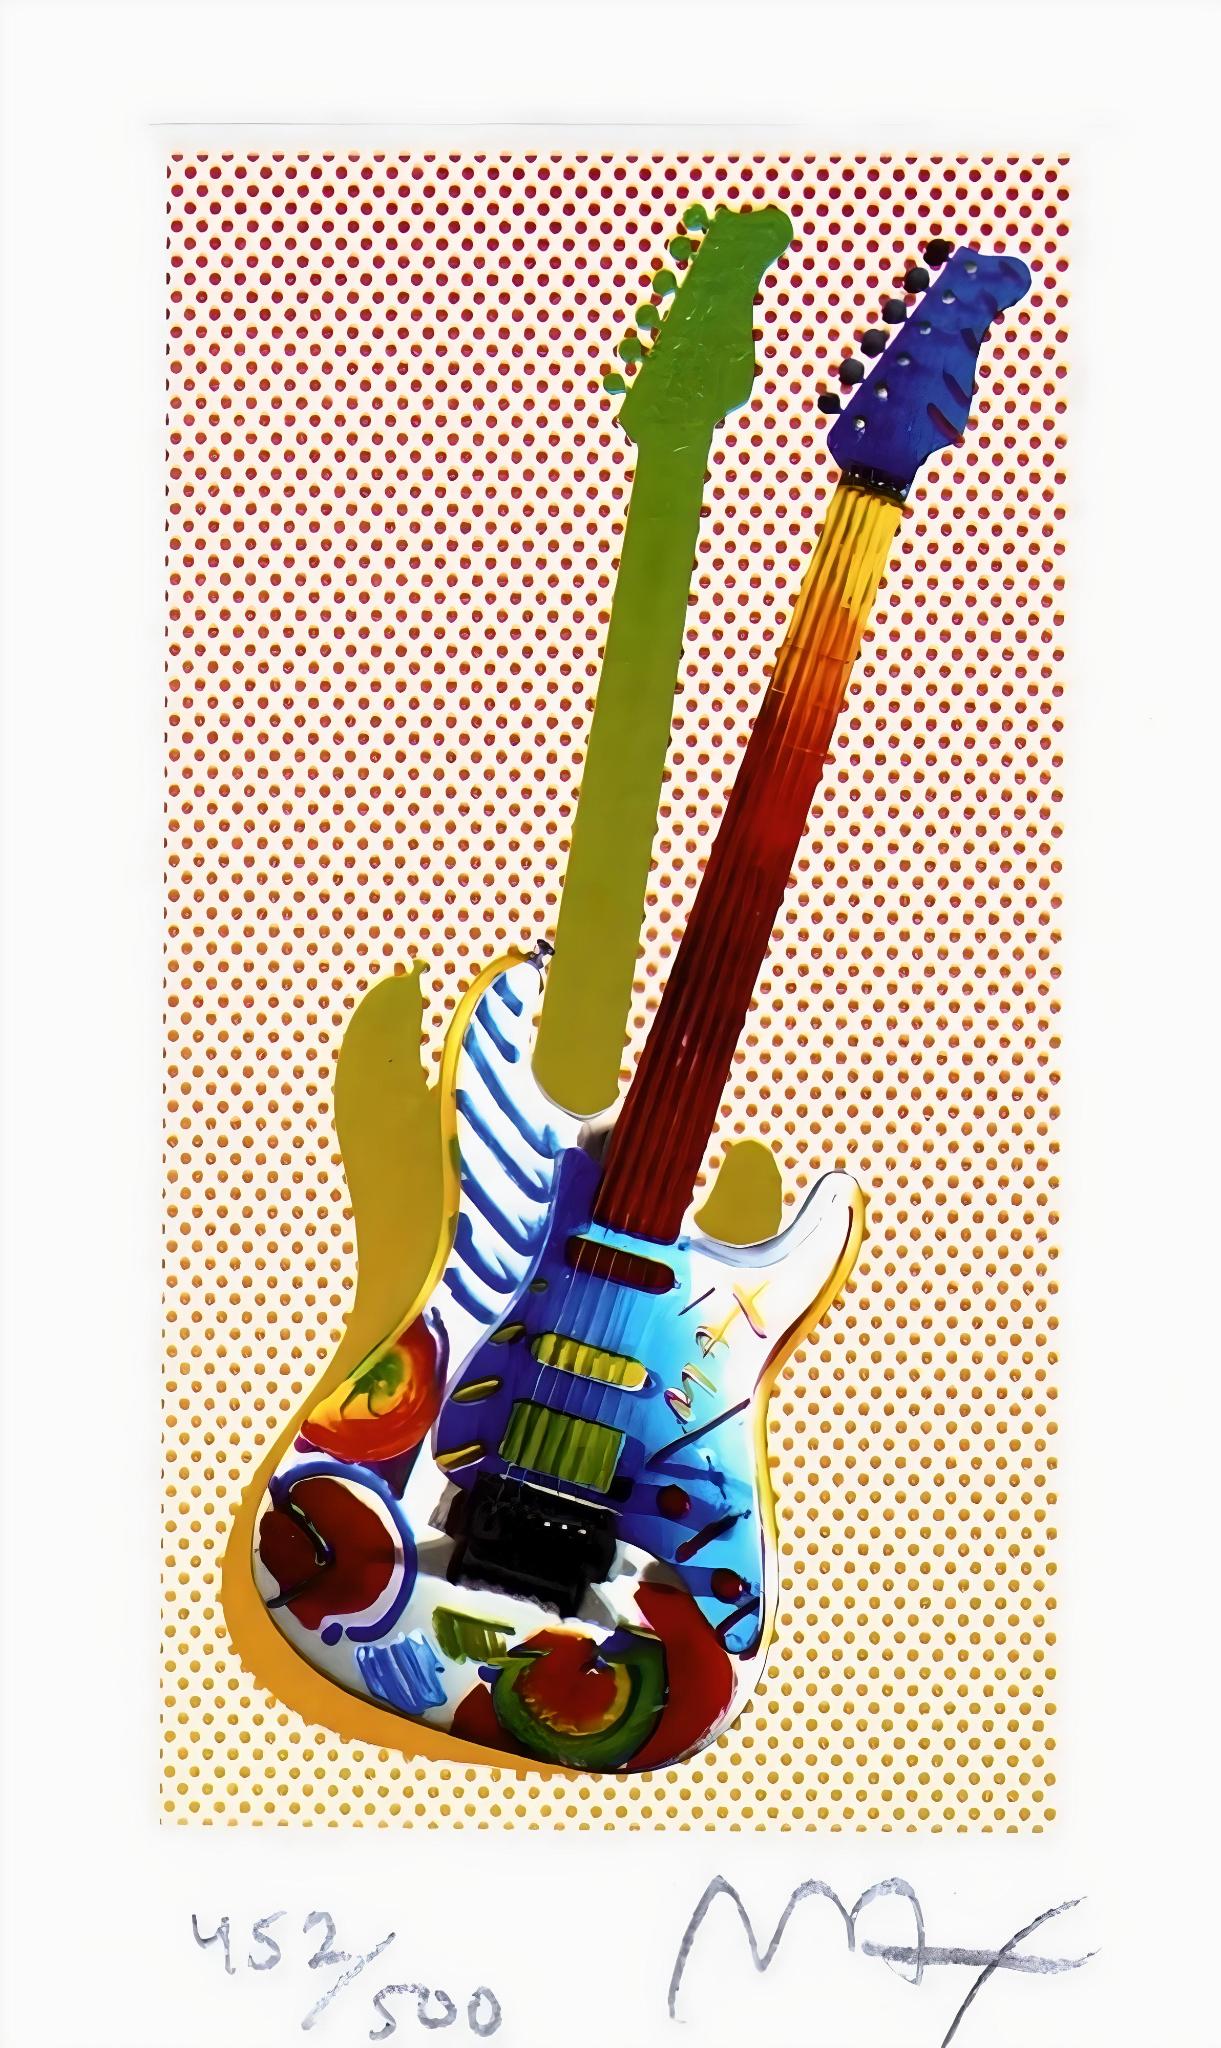 Artist: Peter Max (1937)
Title: Rock N' Roll Guitar I
Year: 2003
Edition: 452/500, plus proofs
Medium: Lithograph on Lustro Saxony paper
Size: 4.12 x 2.43 inches
Condition: Excellent
Inscription: Signed and numbered by the artist.
Notes: Published